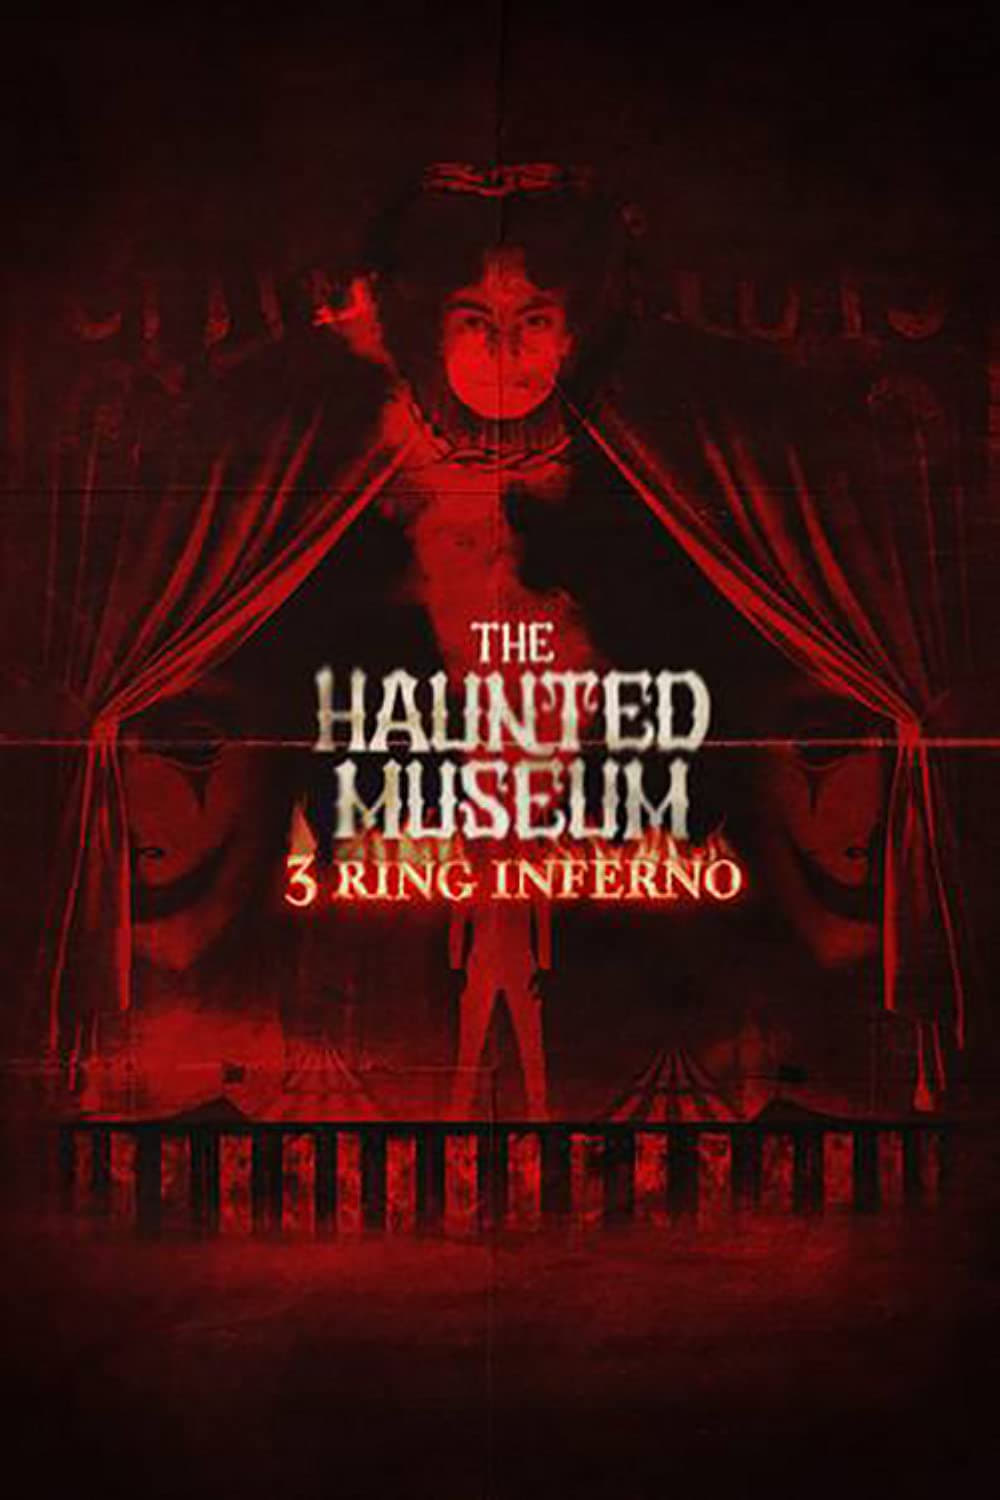 The Haunted Museum: 3 Ring Inferno (2022) poster - Allmovieland.com